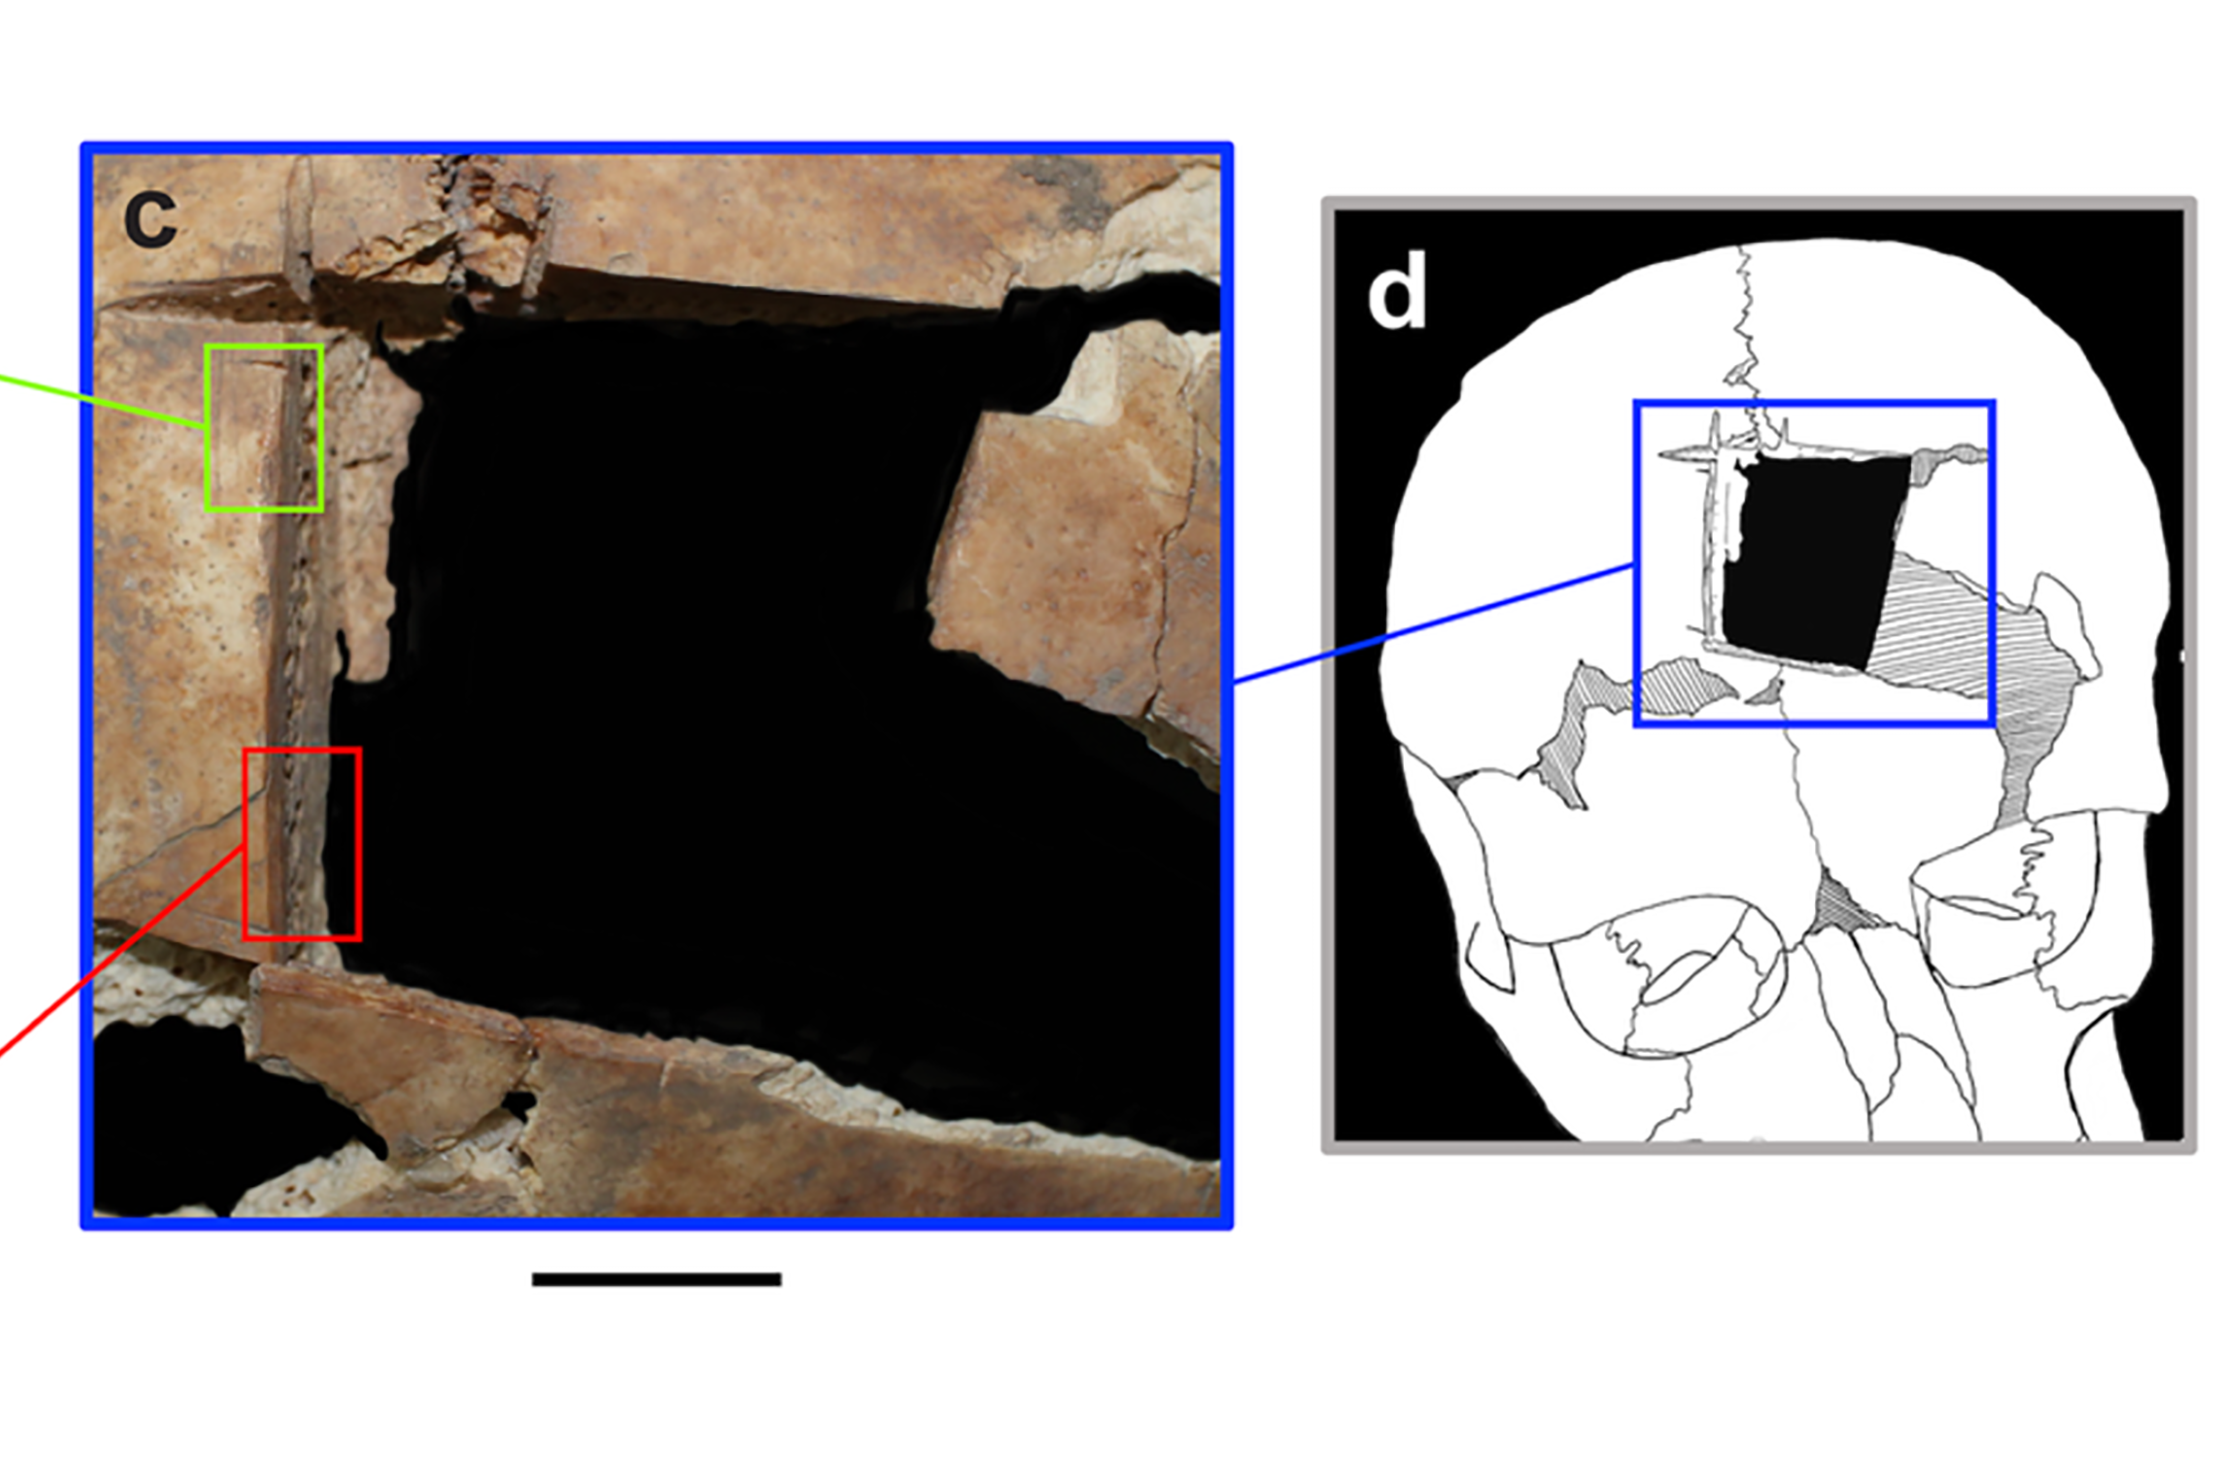 Photos showing skull with a square-shaped hole after surgery. The remains were found in Tel Megiddo in Israel (Kalisher et al/Plos One)